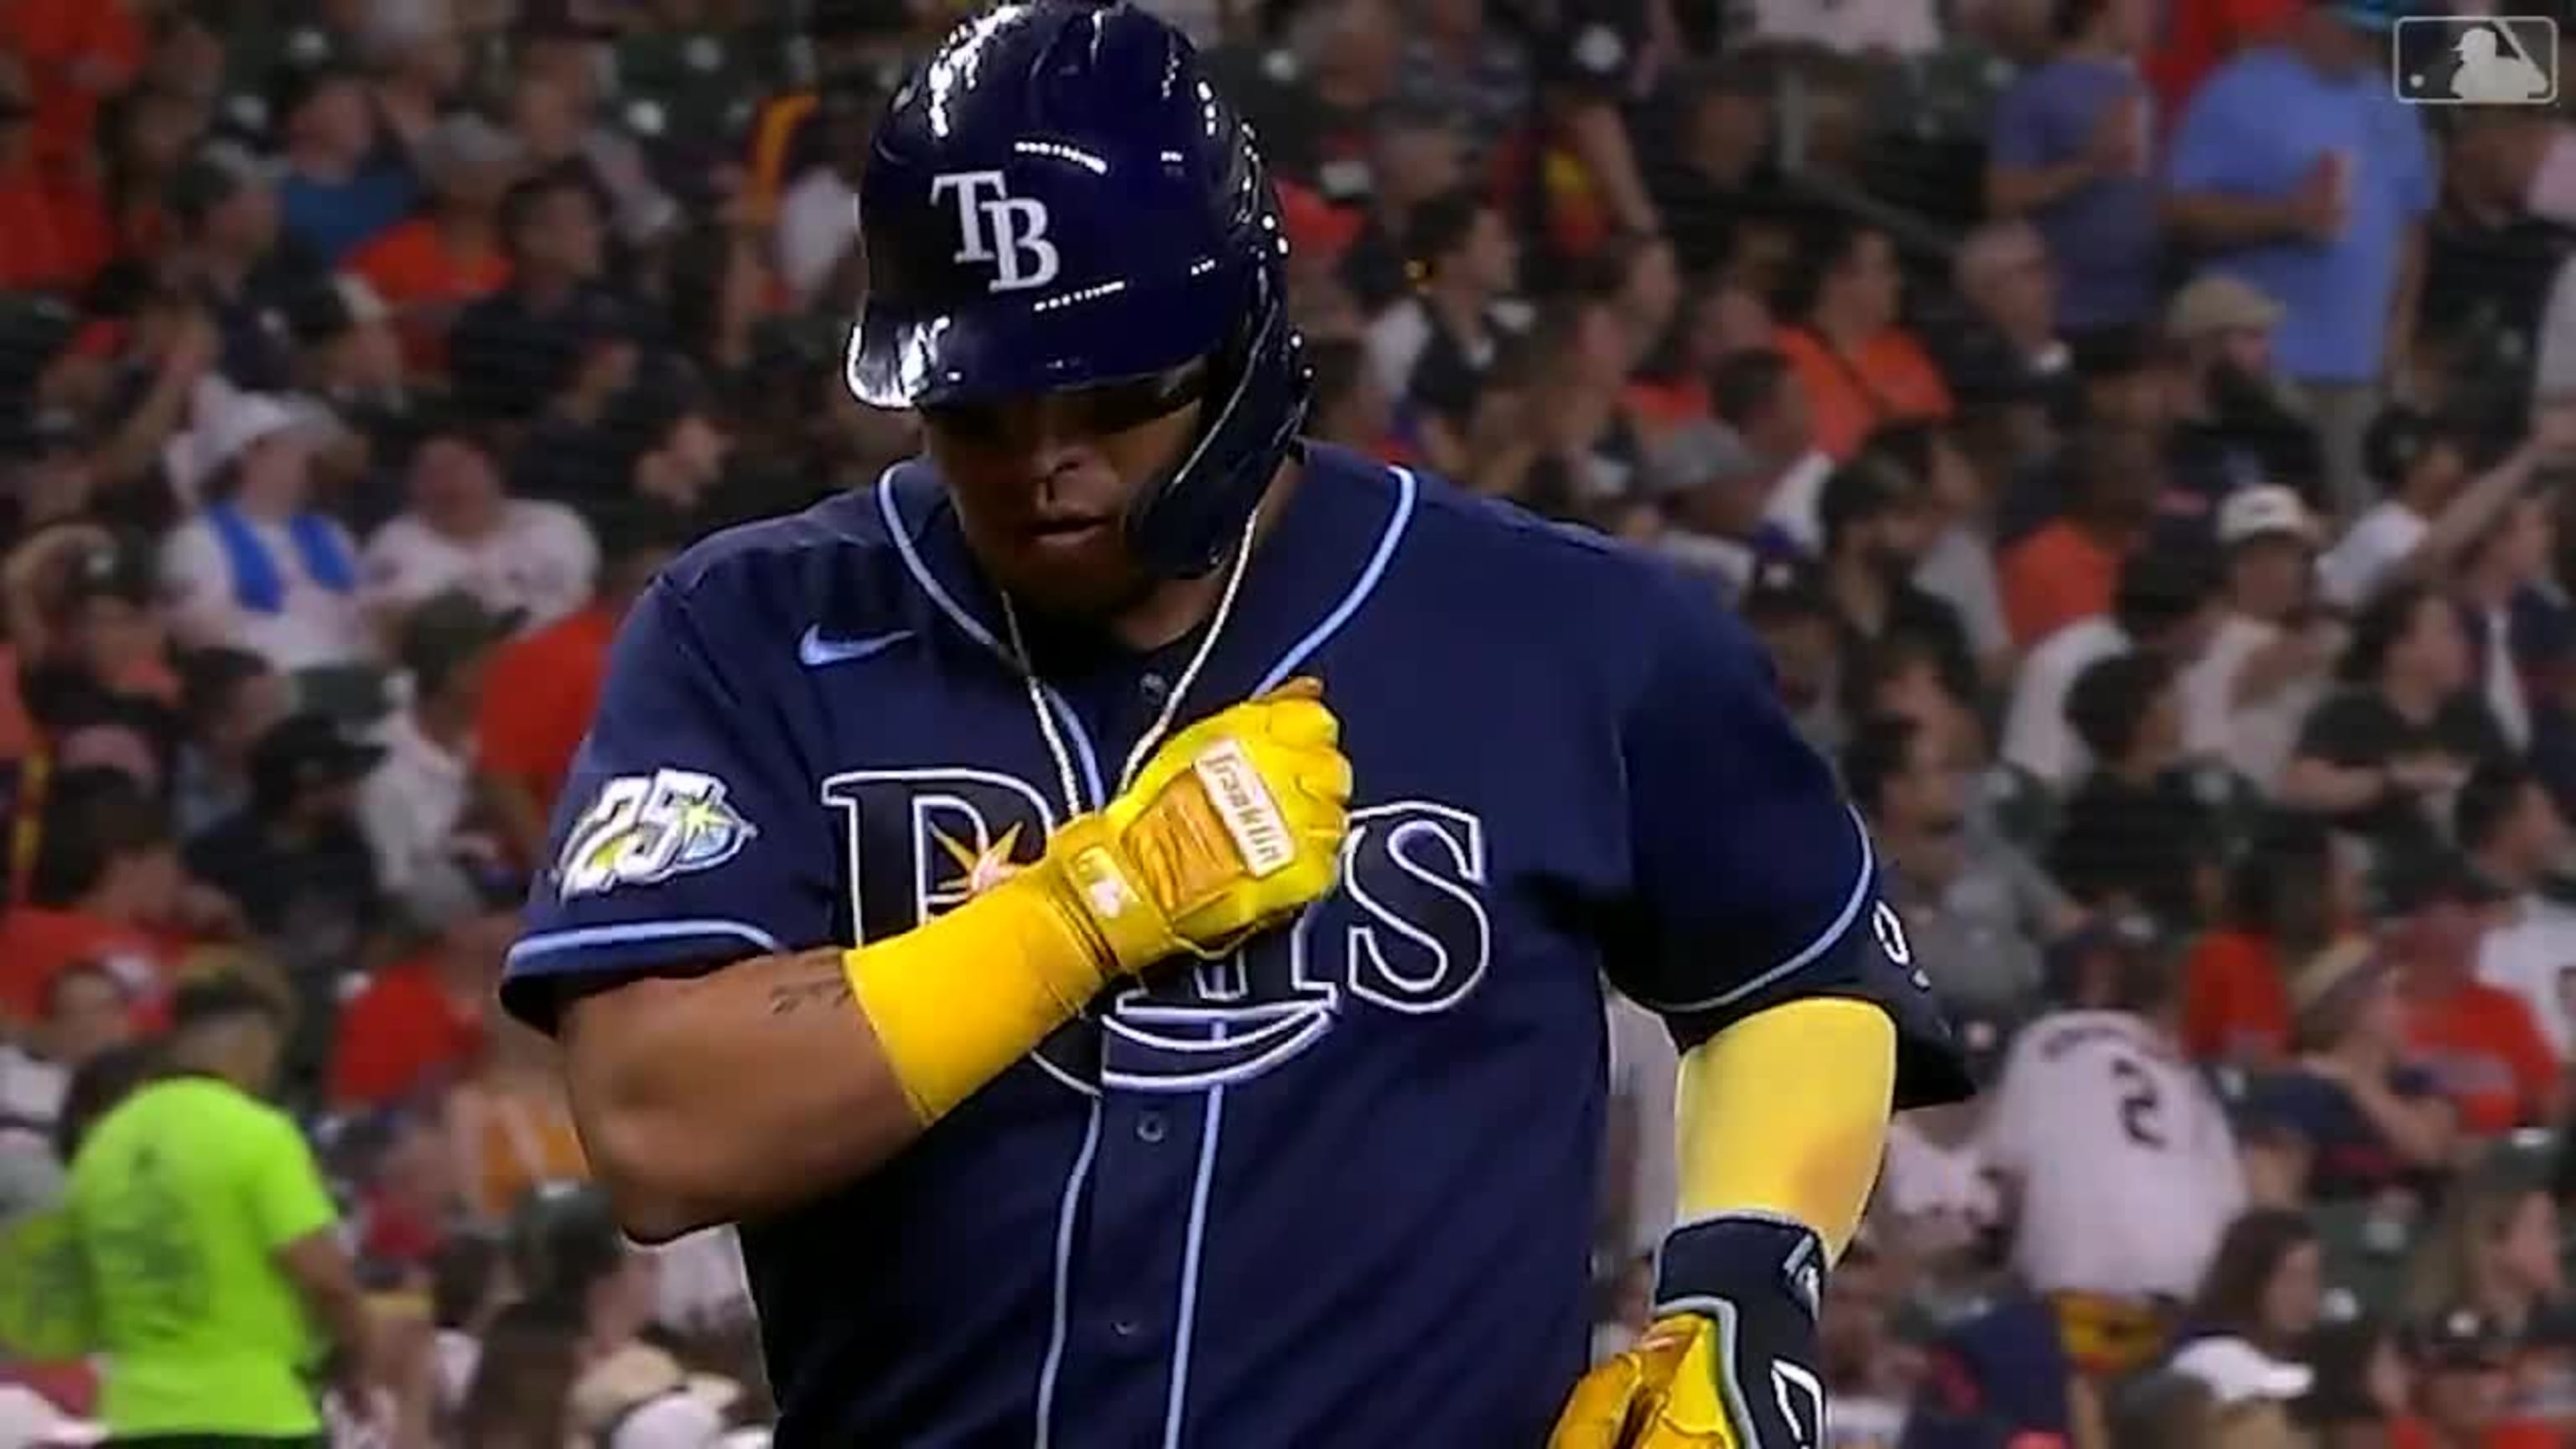 Paredes hits 2 homers over Green Monster, Rays beat Sox 12-4